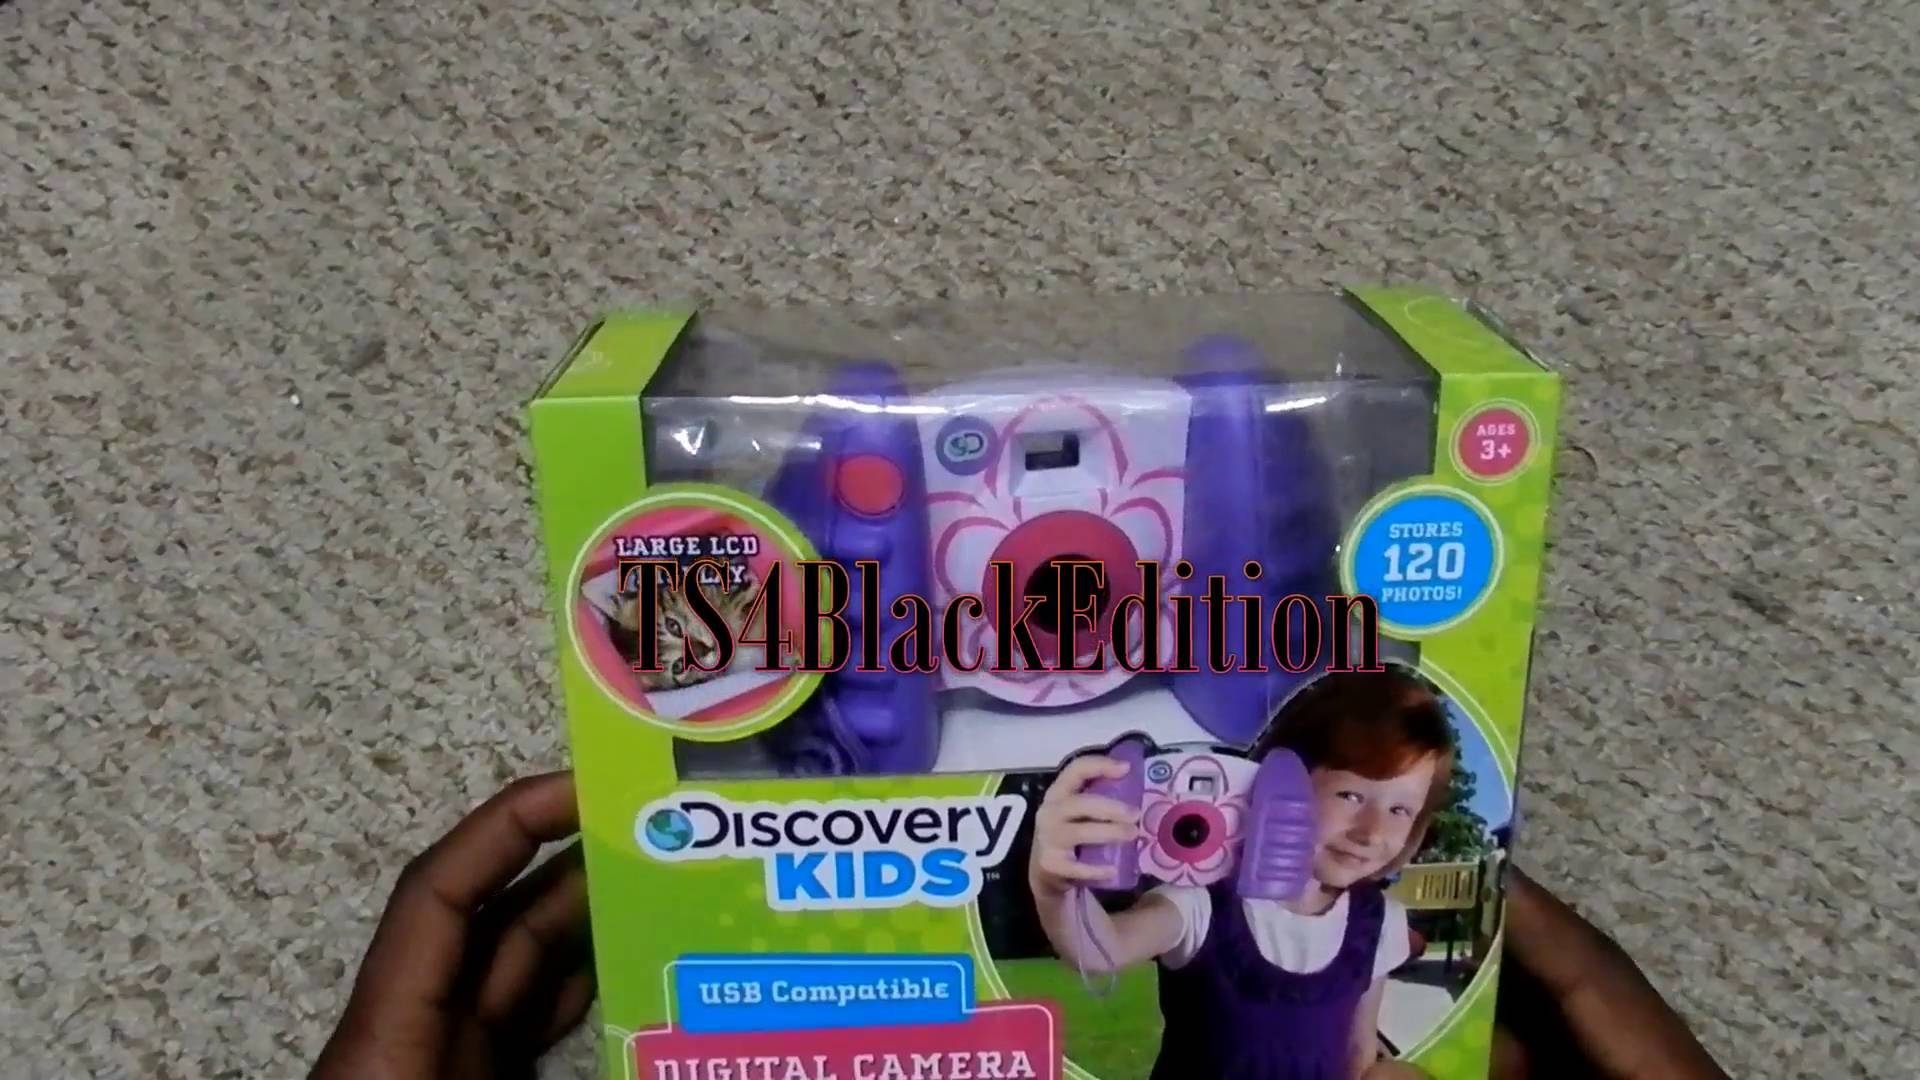 Discovery Kids USB Compatible Handheld Digital Camera Unboxing.